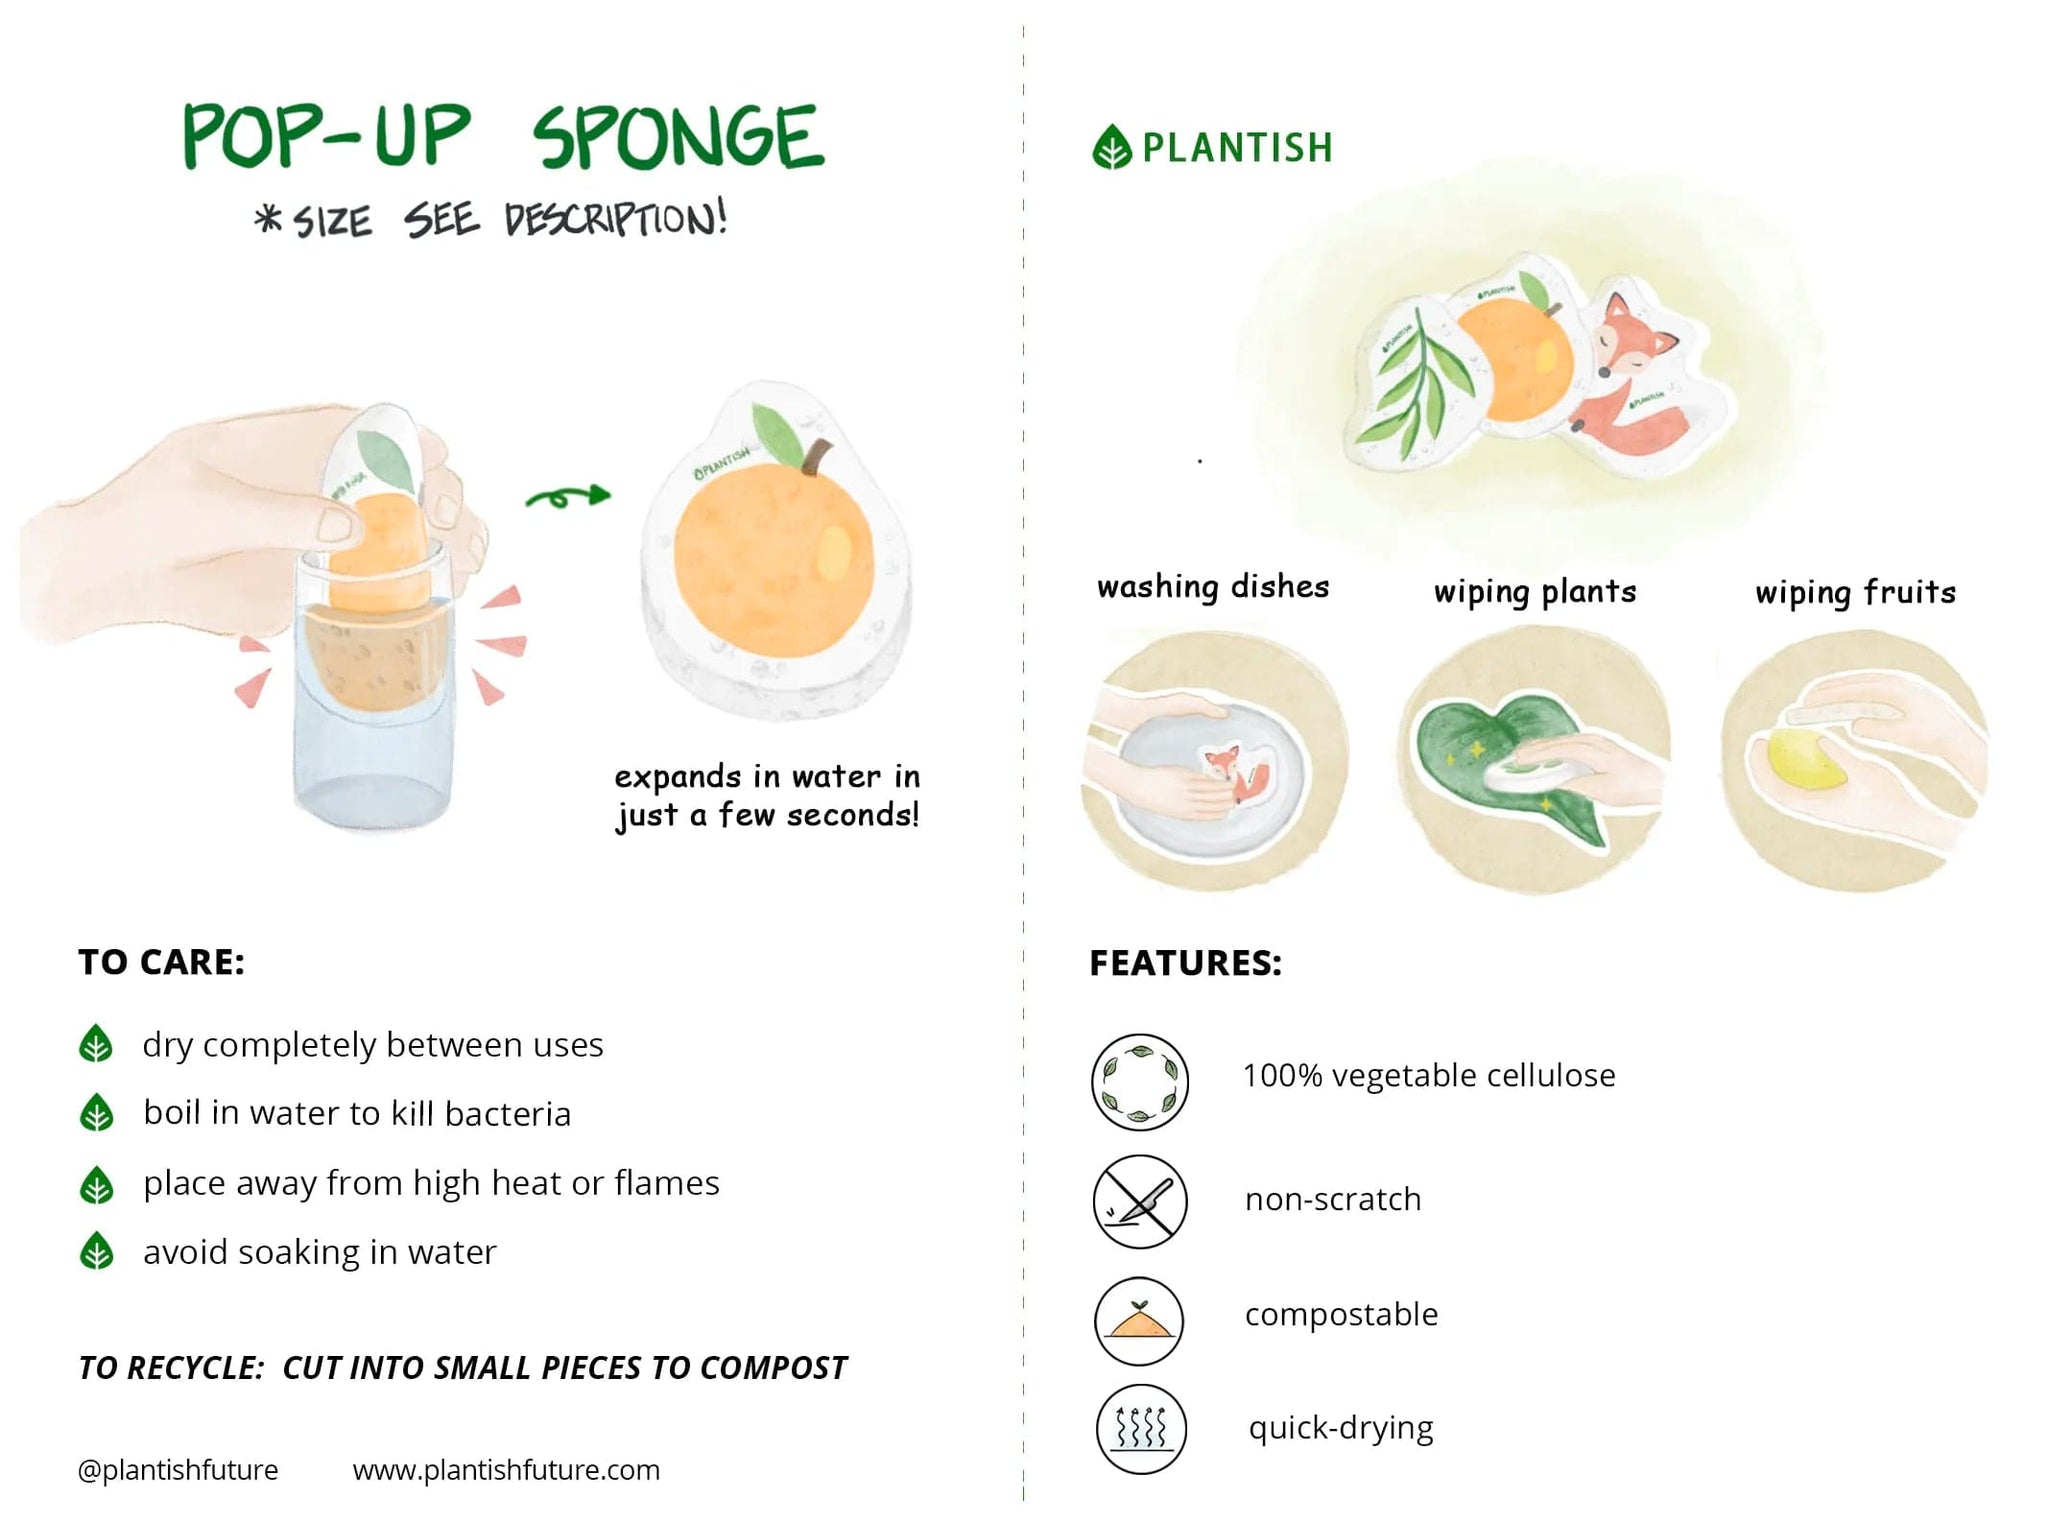 Care tips infographic for eco-friendly kitchen cleaning pop-up sponges. Non-scratch, compostable, and quick drying for your convenience.